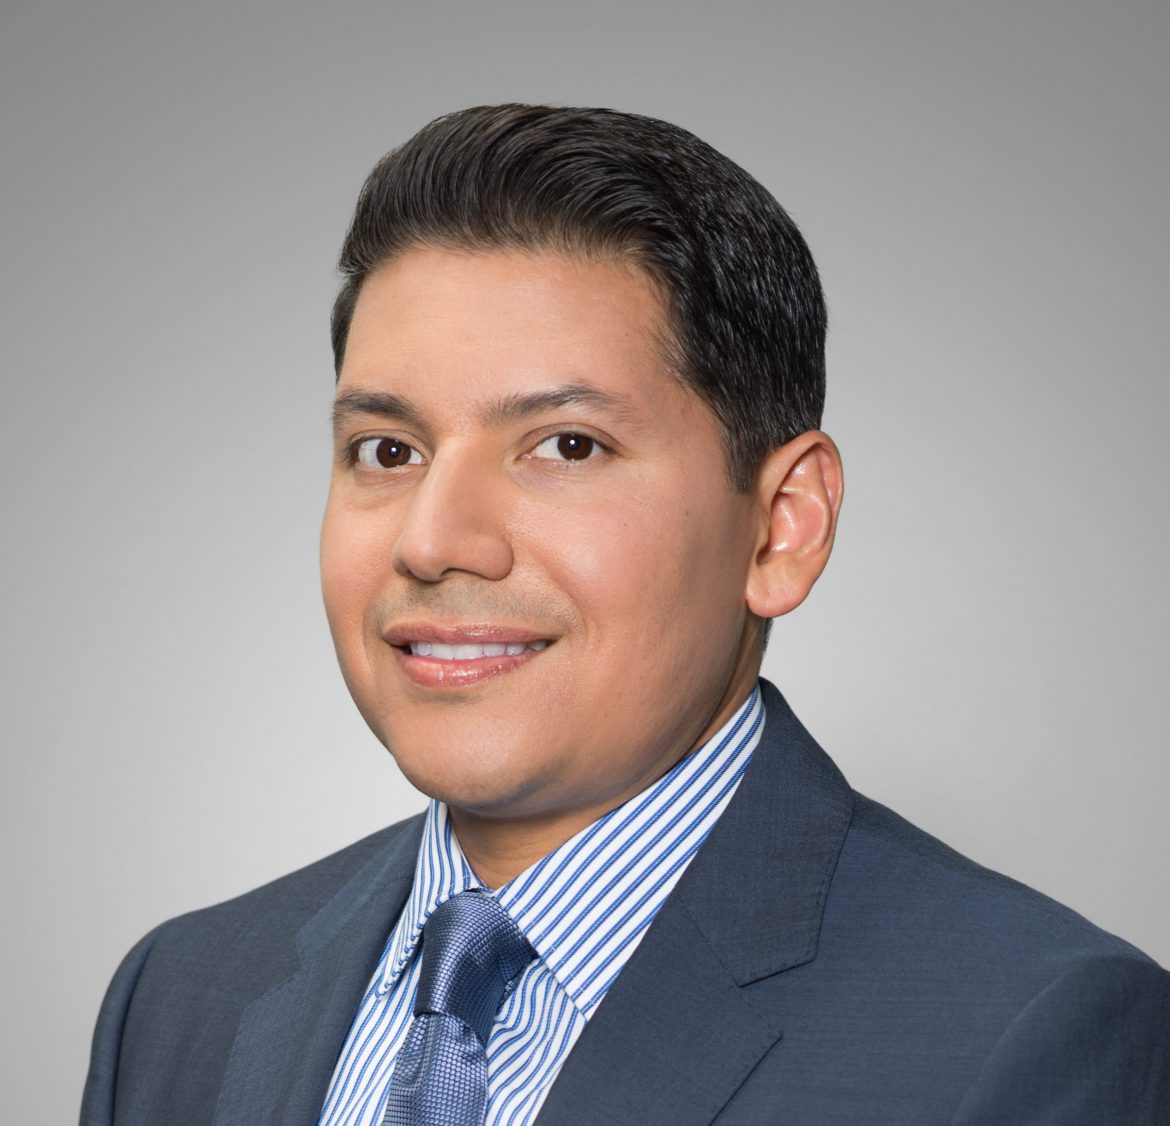 Epson America Appoints Joseph Contreras as Head of Sales and Channel Marketing for Business Inkjet Organization